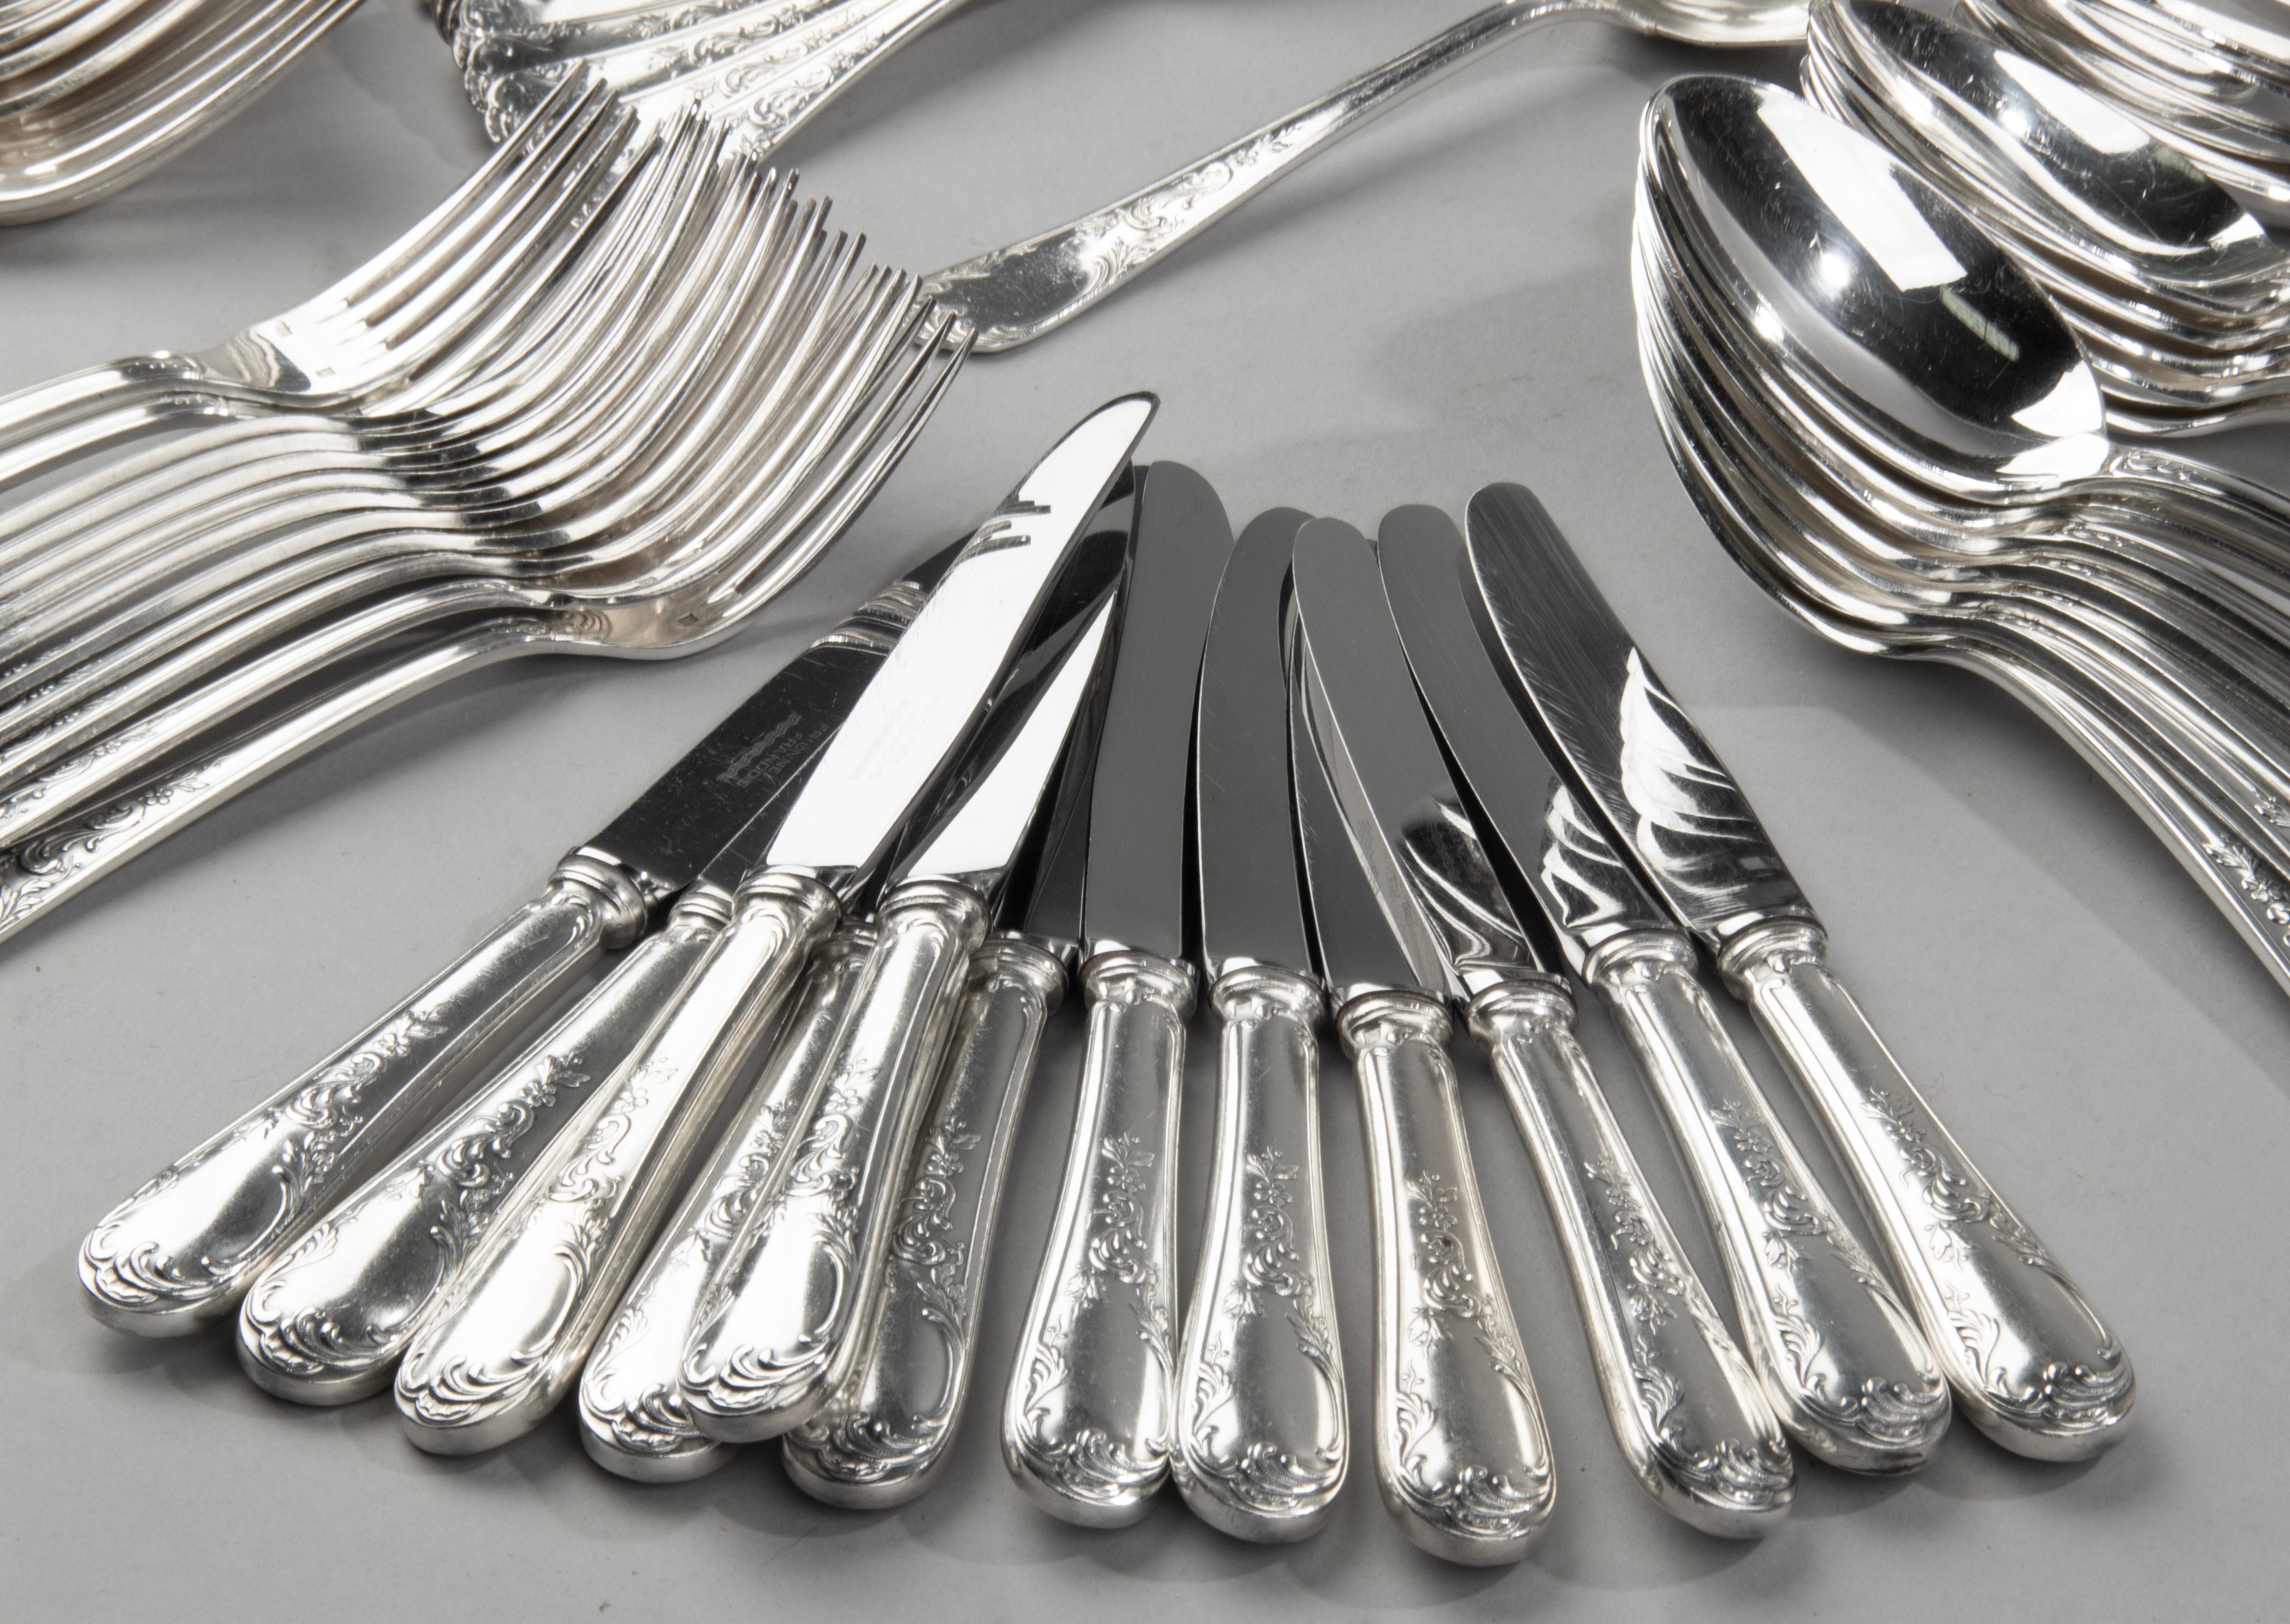 130-Piece Set Silver Plated Flatware, Frionnet France, Rococo Style For Sale 11